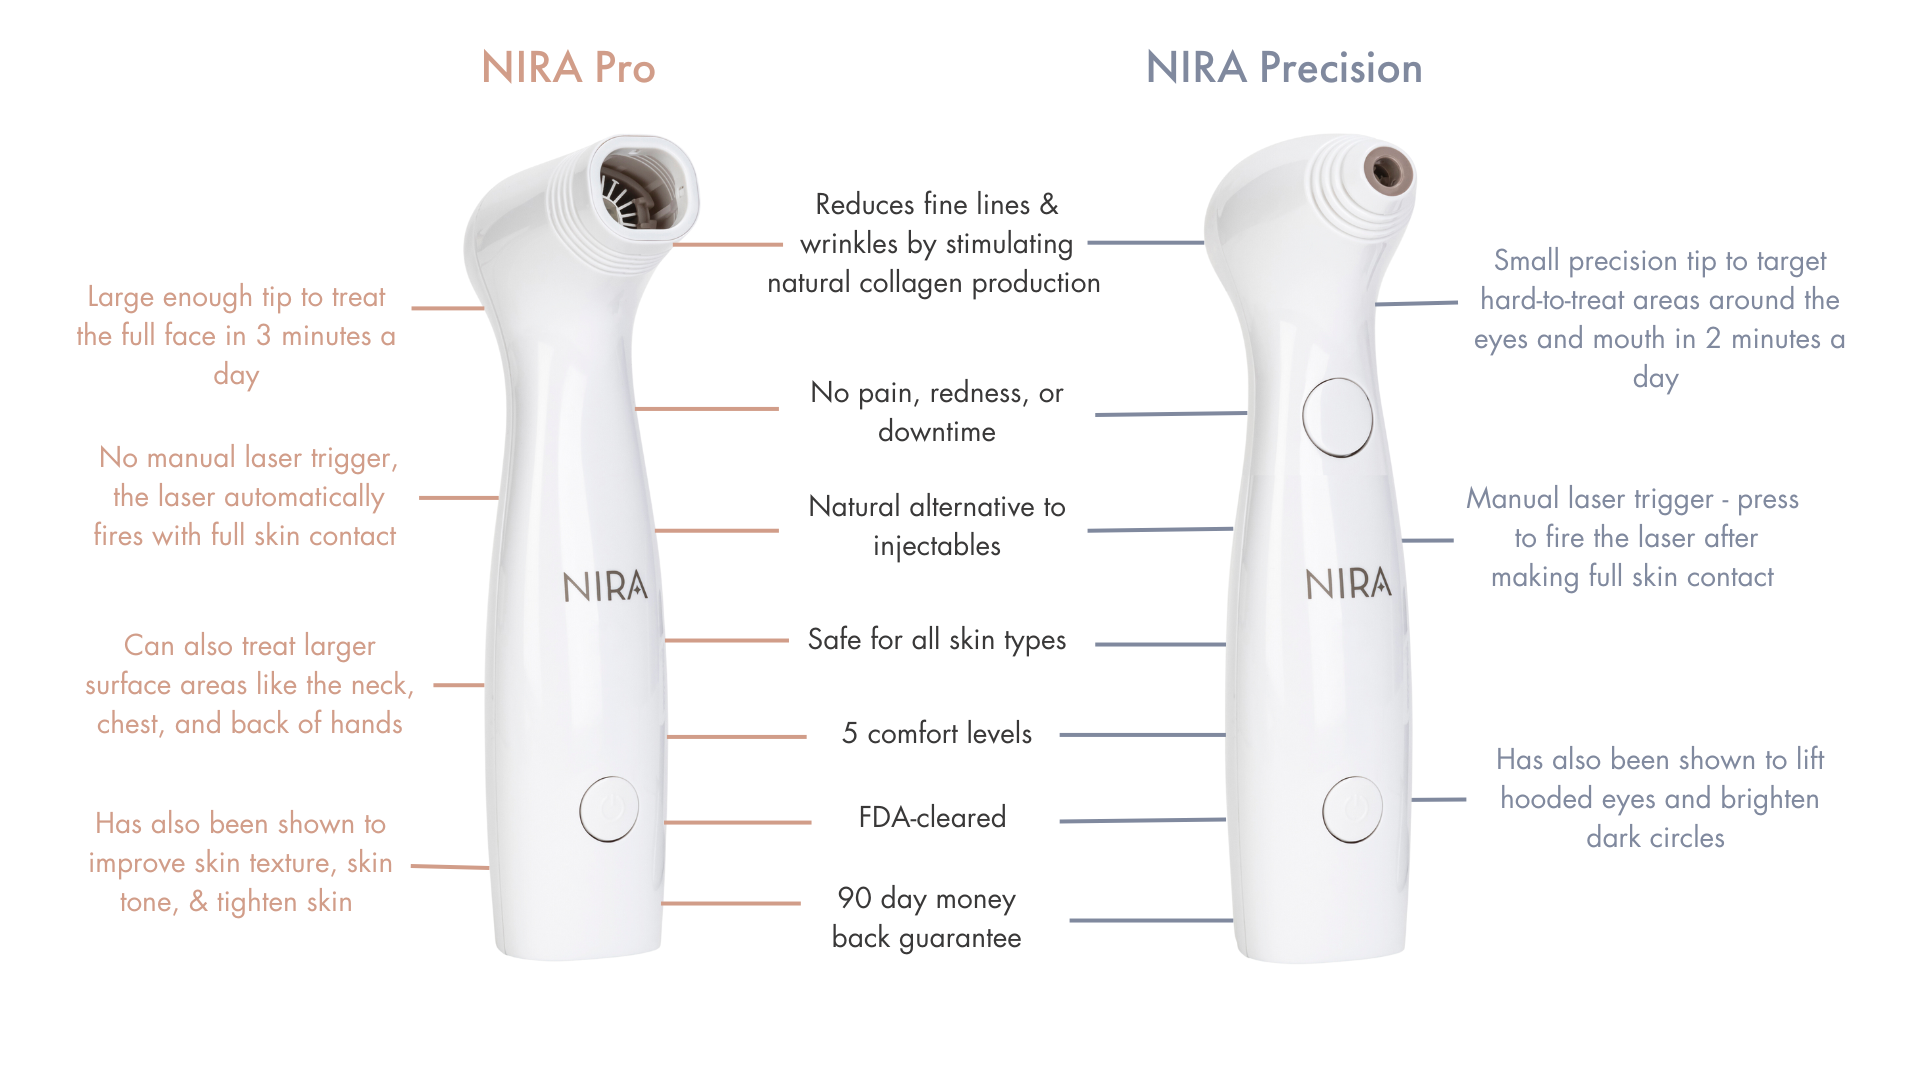 A side-by-side comparison of NIRA Pro and NIRA Precision lasers